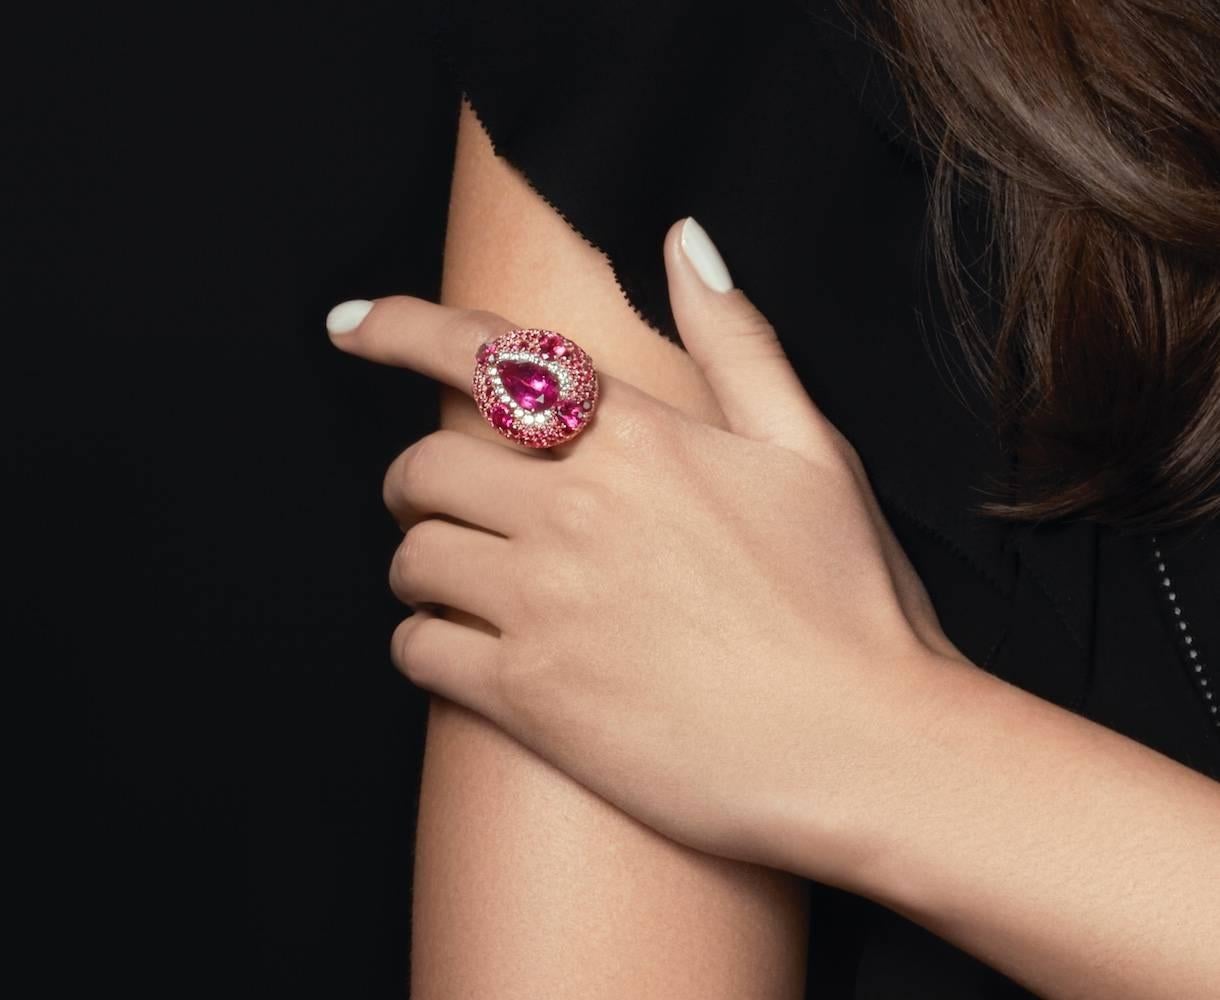 This beautiful and bold ring is  part of  the Out of Africa collection from Vanleles which is dedicated, entirely, to the beauty of Mozambique’s rubies and rubelites. The bold use of a singular colour with ever so slightly differing hues, gives this